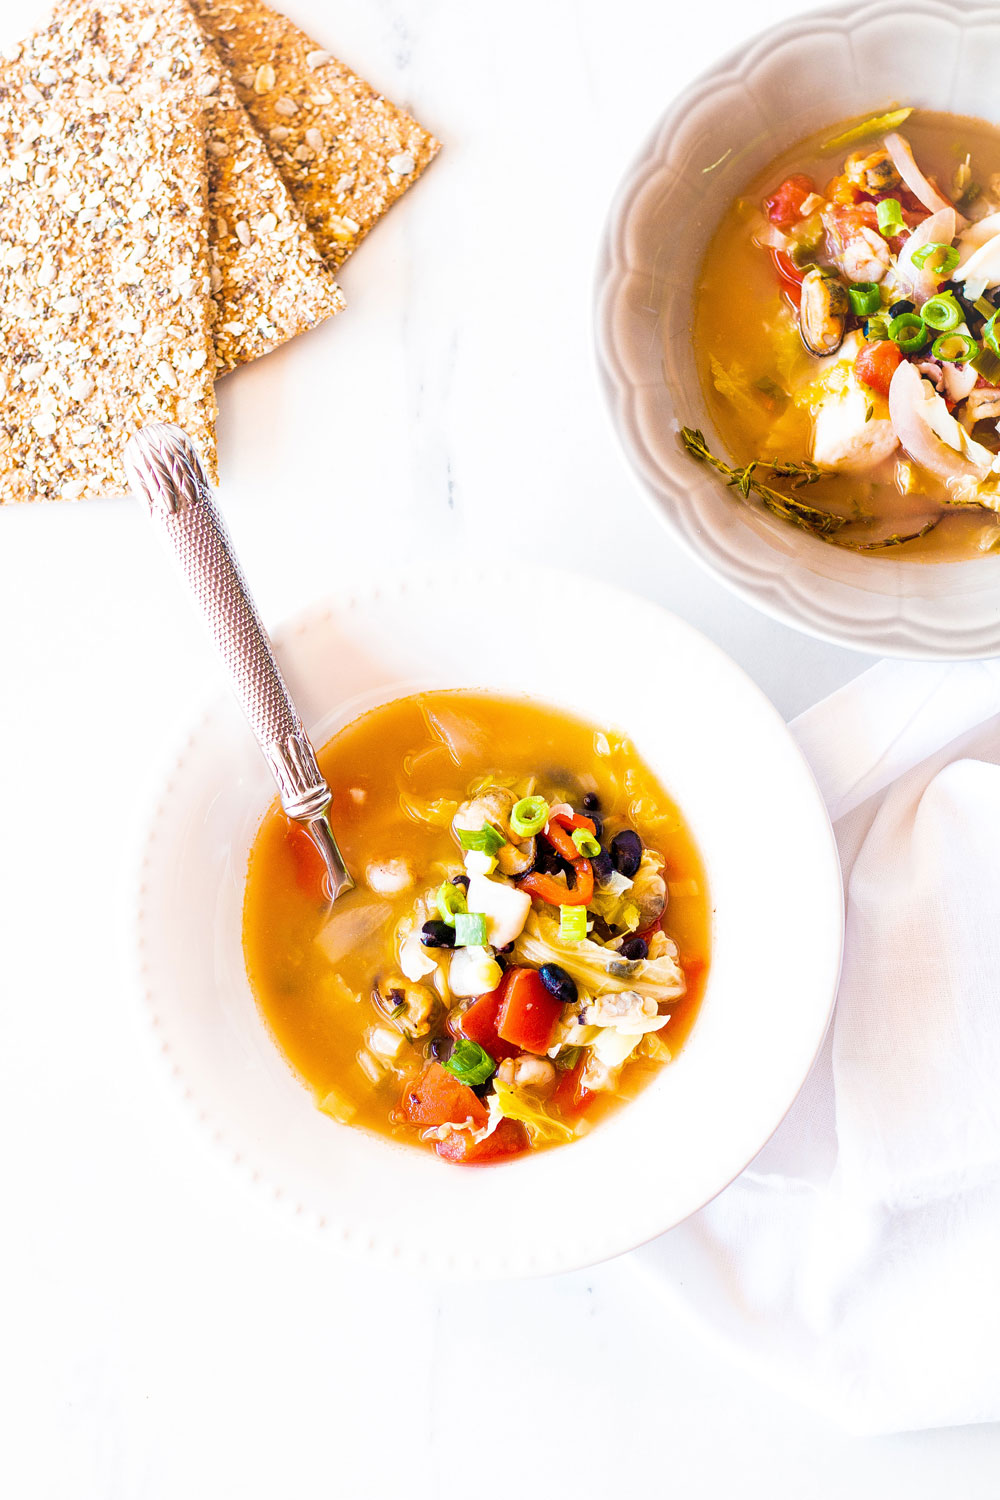 Cozy up this autumn with this rustic vegetable & seafood soup. A hearty and nourishing soup recipe that is quick to impress and incredibly easy to make! https://www.spotebi.com/recipes/rustic-vegetable-seafood-soup-recipe/